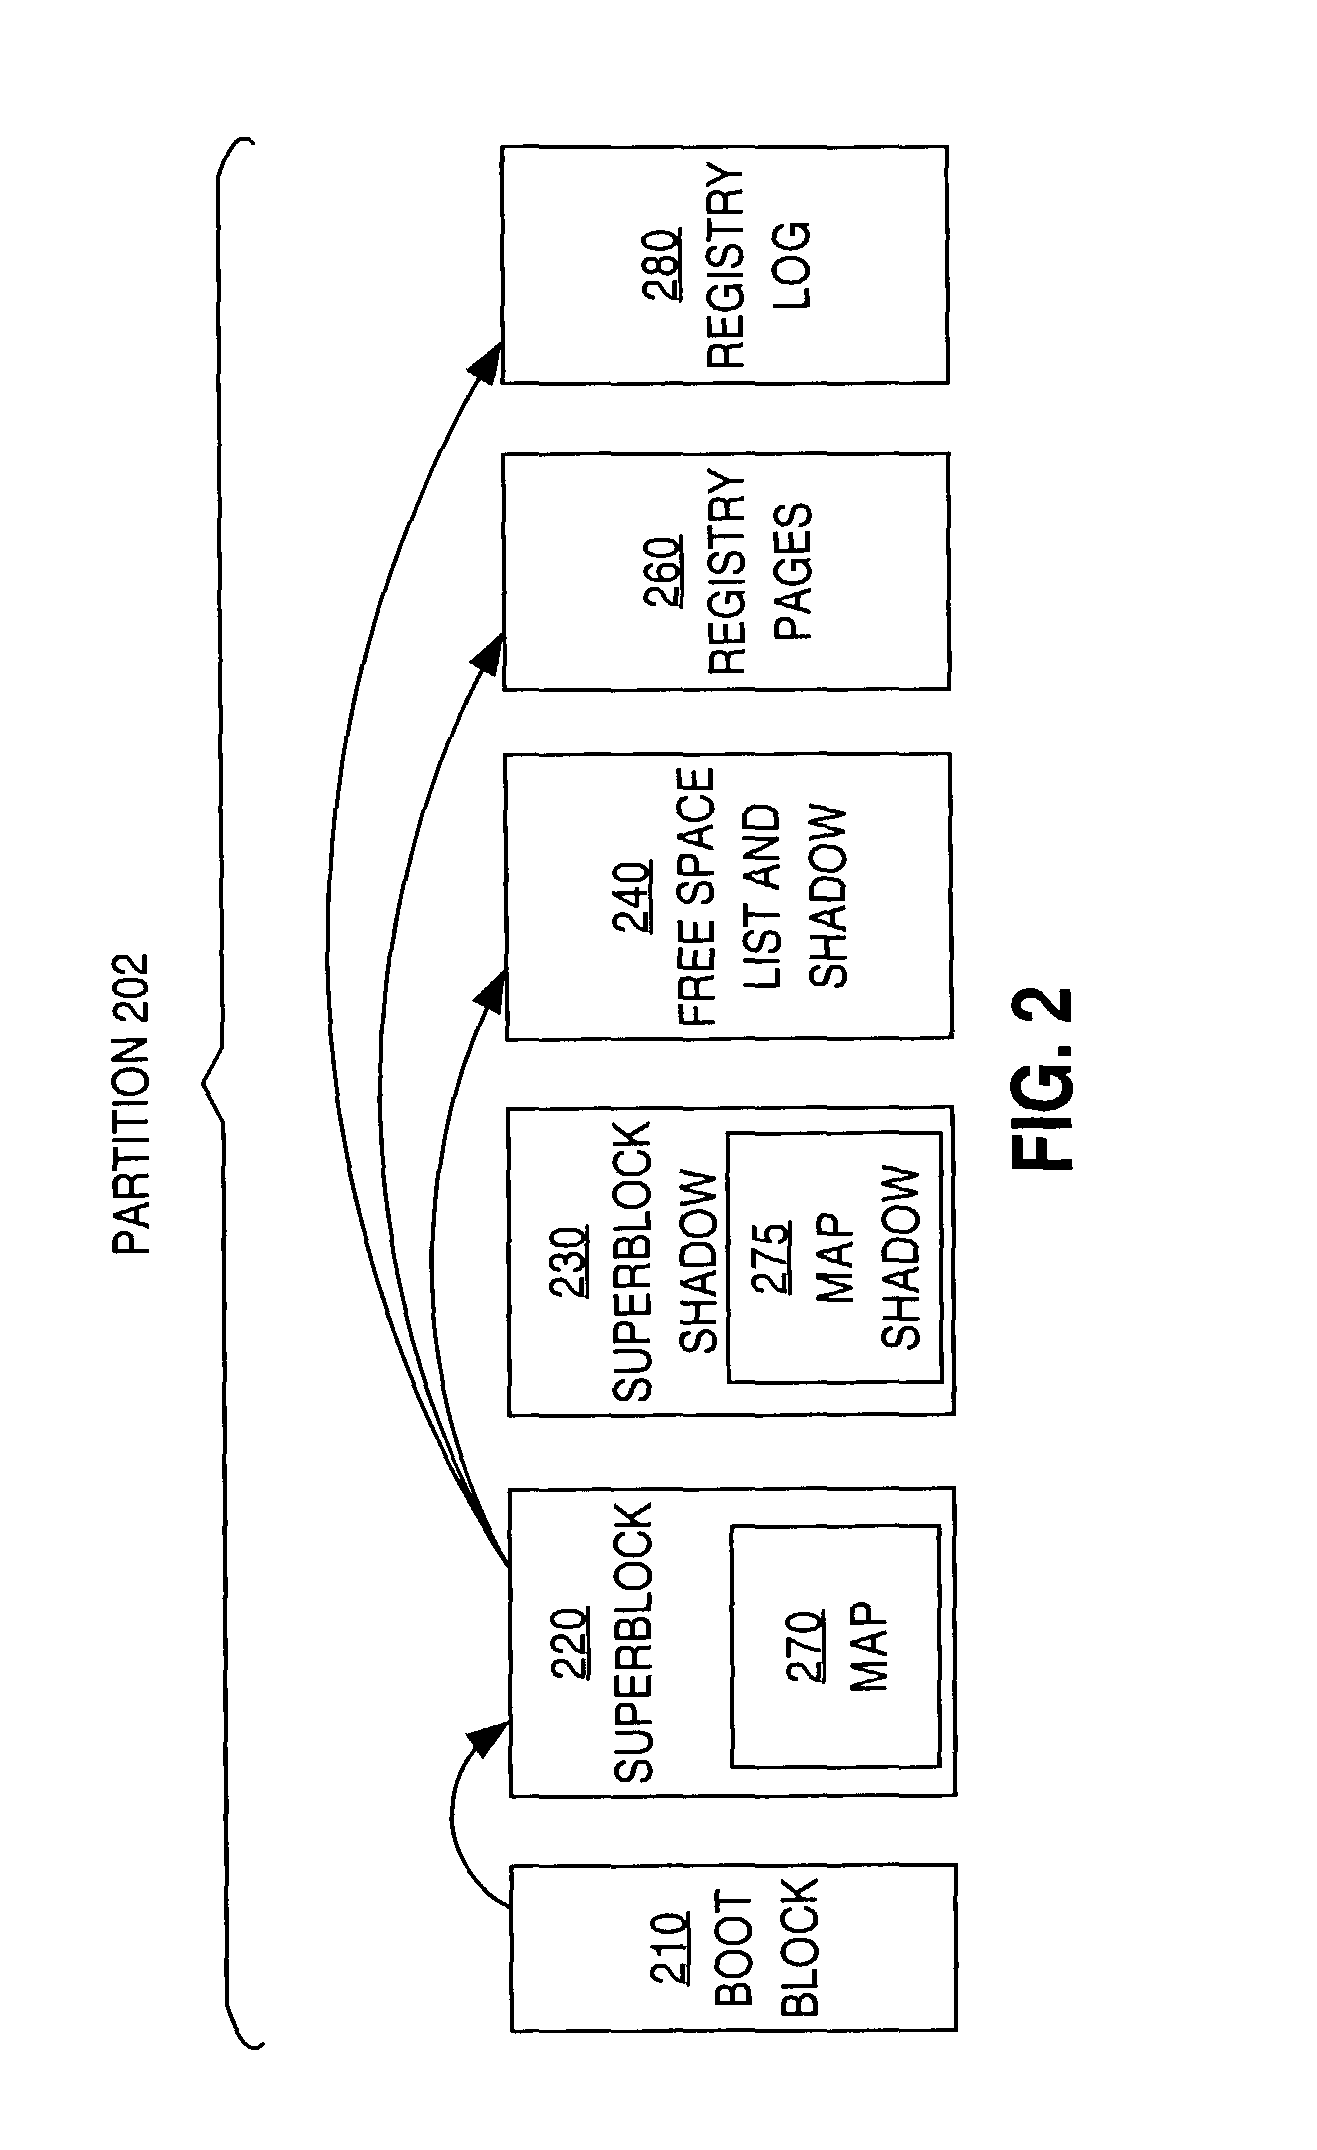 Metadata format for hierarchical data storage on a raw storage device